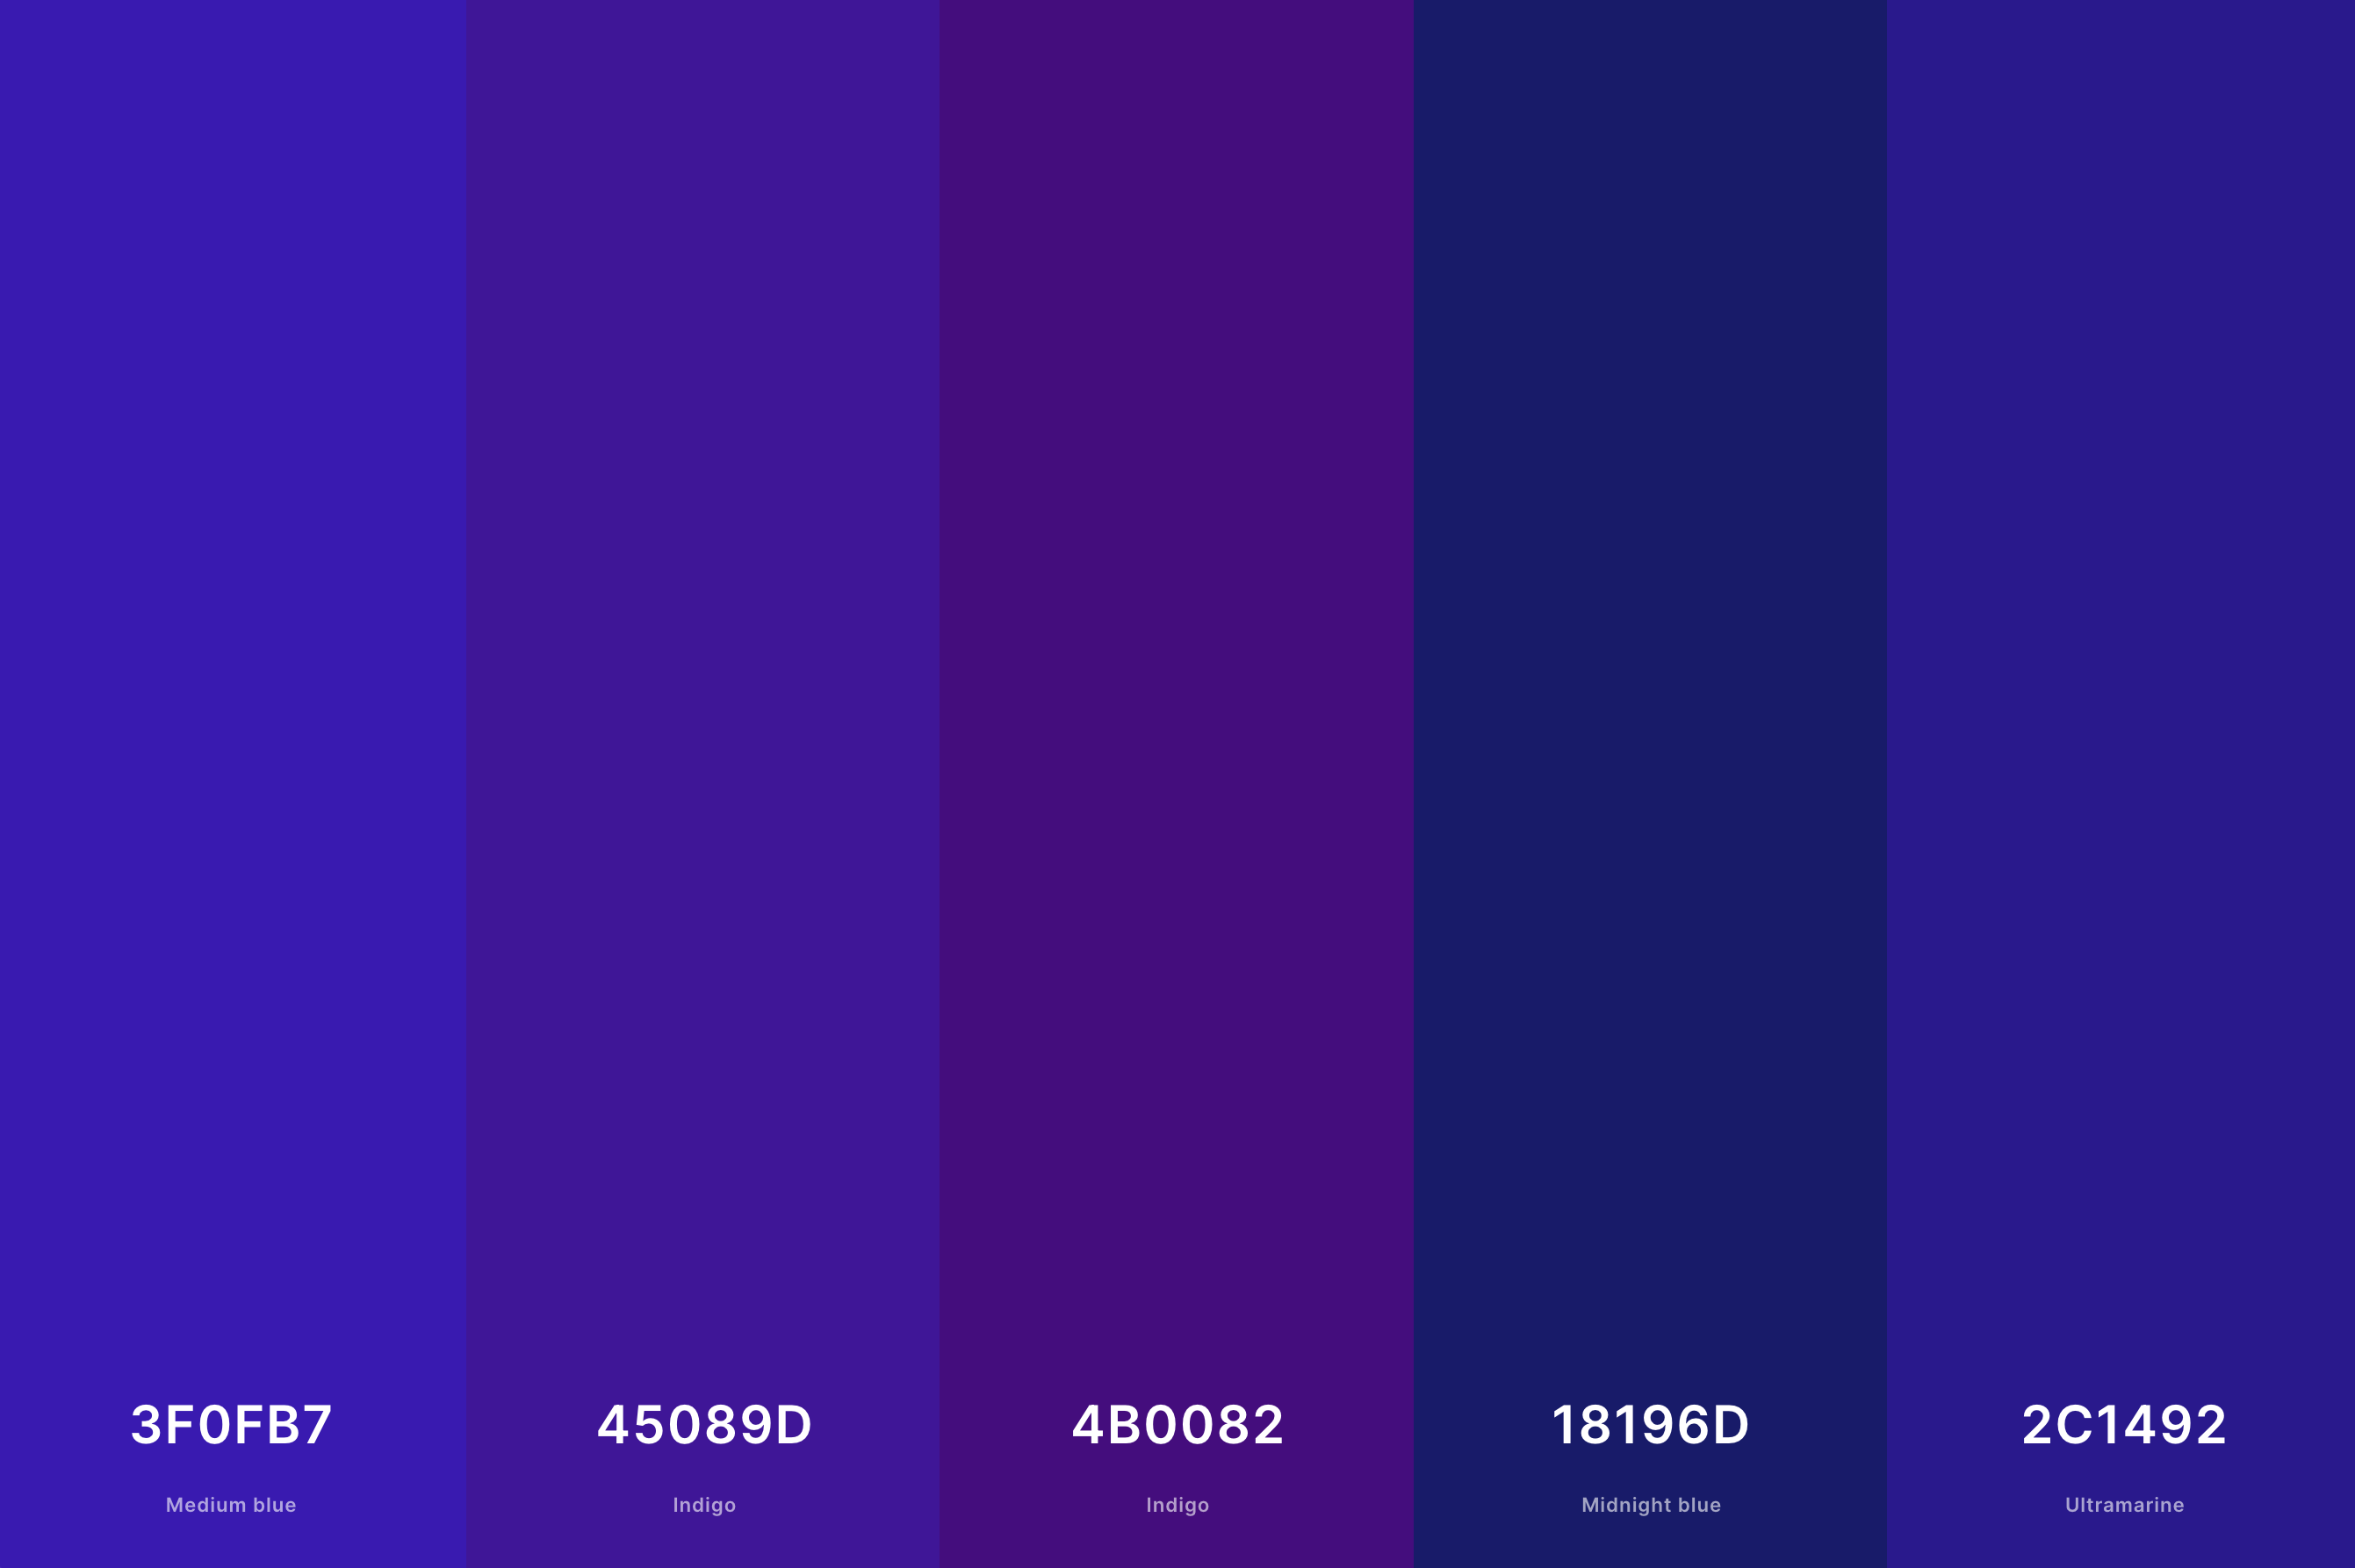 1. Indigo Blue Color Palette Color Palette with Medium Blue (Hex #3F0FB7) + Indigo (Hex #45089D) + Indigo (Hex #4B0082) + Midnight Blue (Hex #18196D) + Ultramarine (Hex #2C1492) Color Palette with Hex Codes